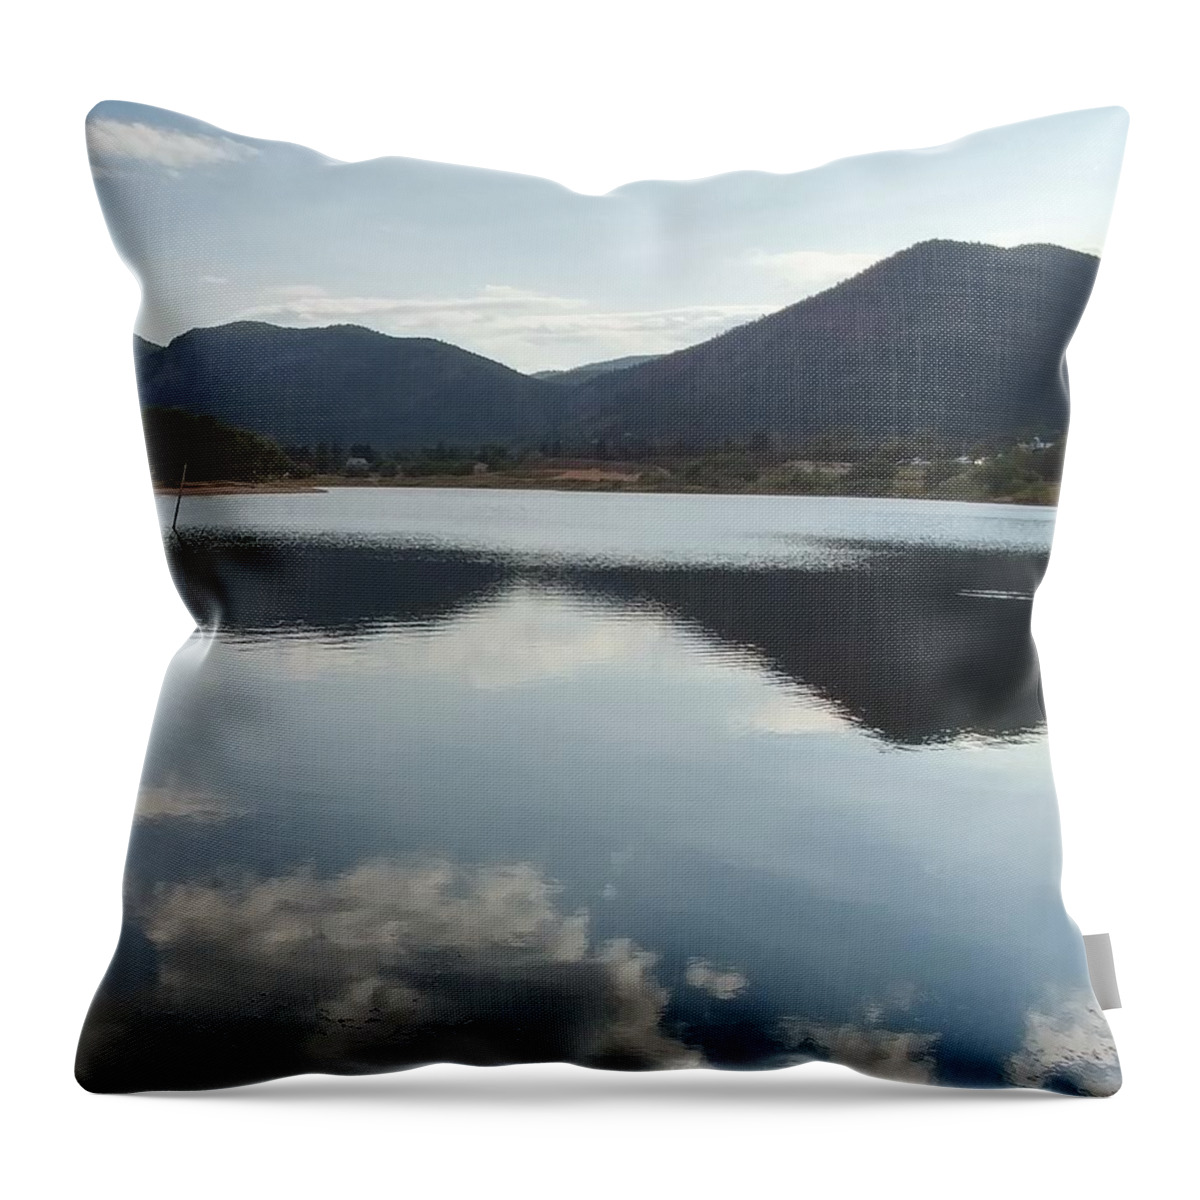 Mountain Reflections Throw Pillow featuring the photograph Mountain Reflections by Jennifer Forsyth